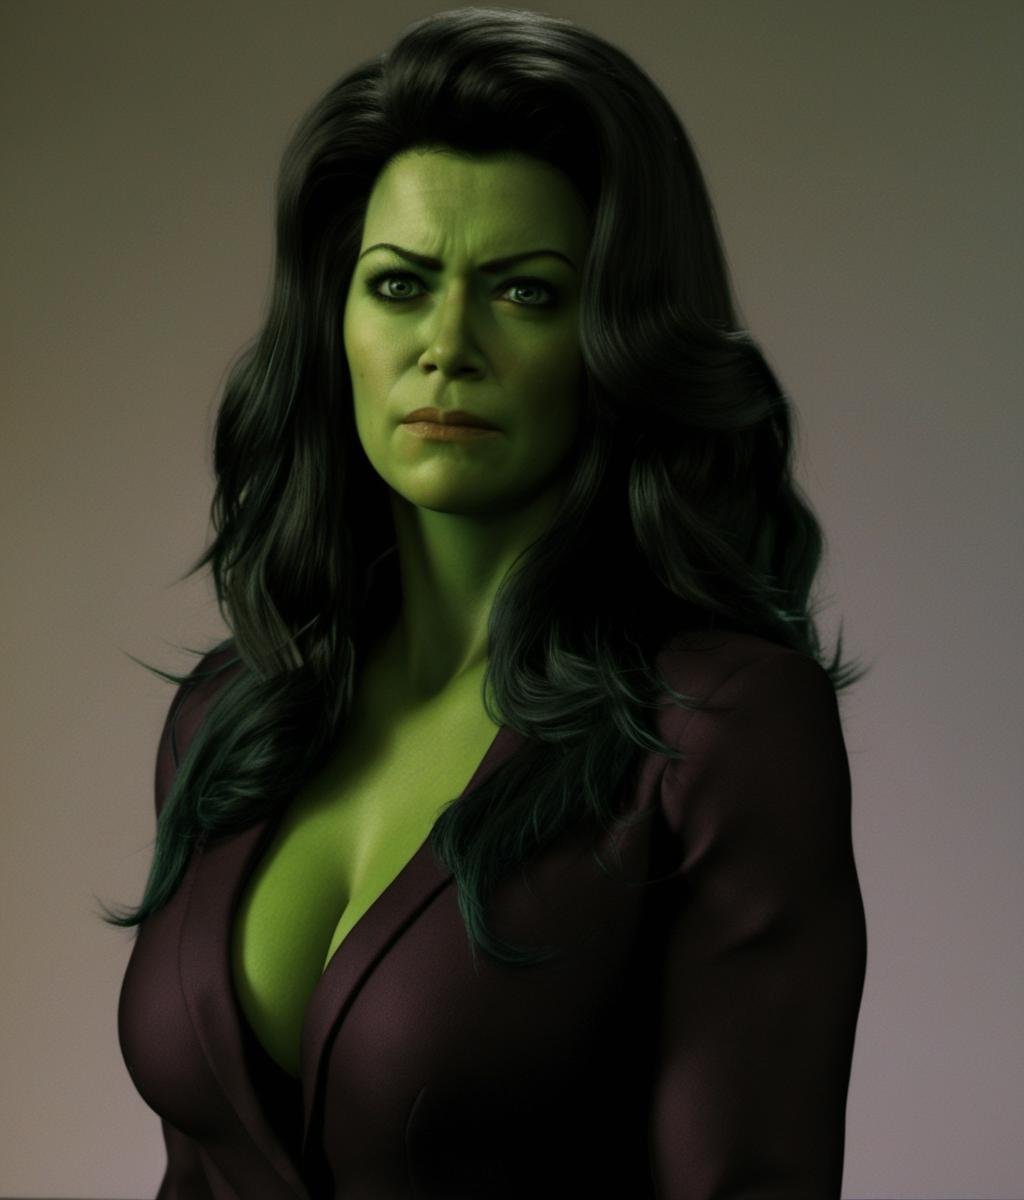 ((big cleavage:1.8)), big cleavage, big cleavage, big cleavage, A full-body depiction of angry ohwx woman, green skin, Full-body depiction, ((ample big cleavage:1.4, generous big breasts:1.5)), alluring black suit without any clothes inside it, strategically openings to show cleavage, captivating seductive smile, hair elegantly tied back, angry expression, long sleeves, enchanting sultry gaze looking at the viewer. <lora:SHEHULK_SDXL-000005:0.75> 